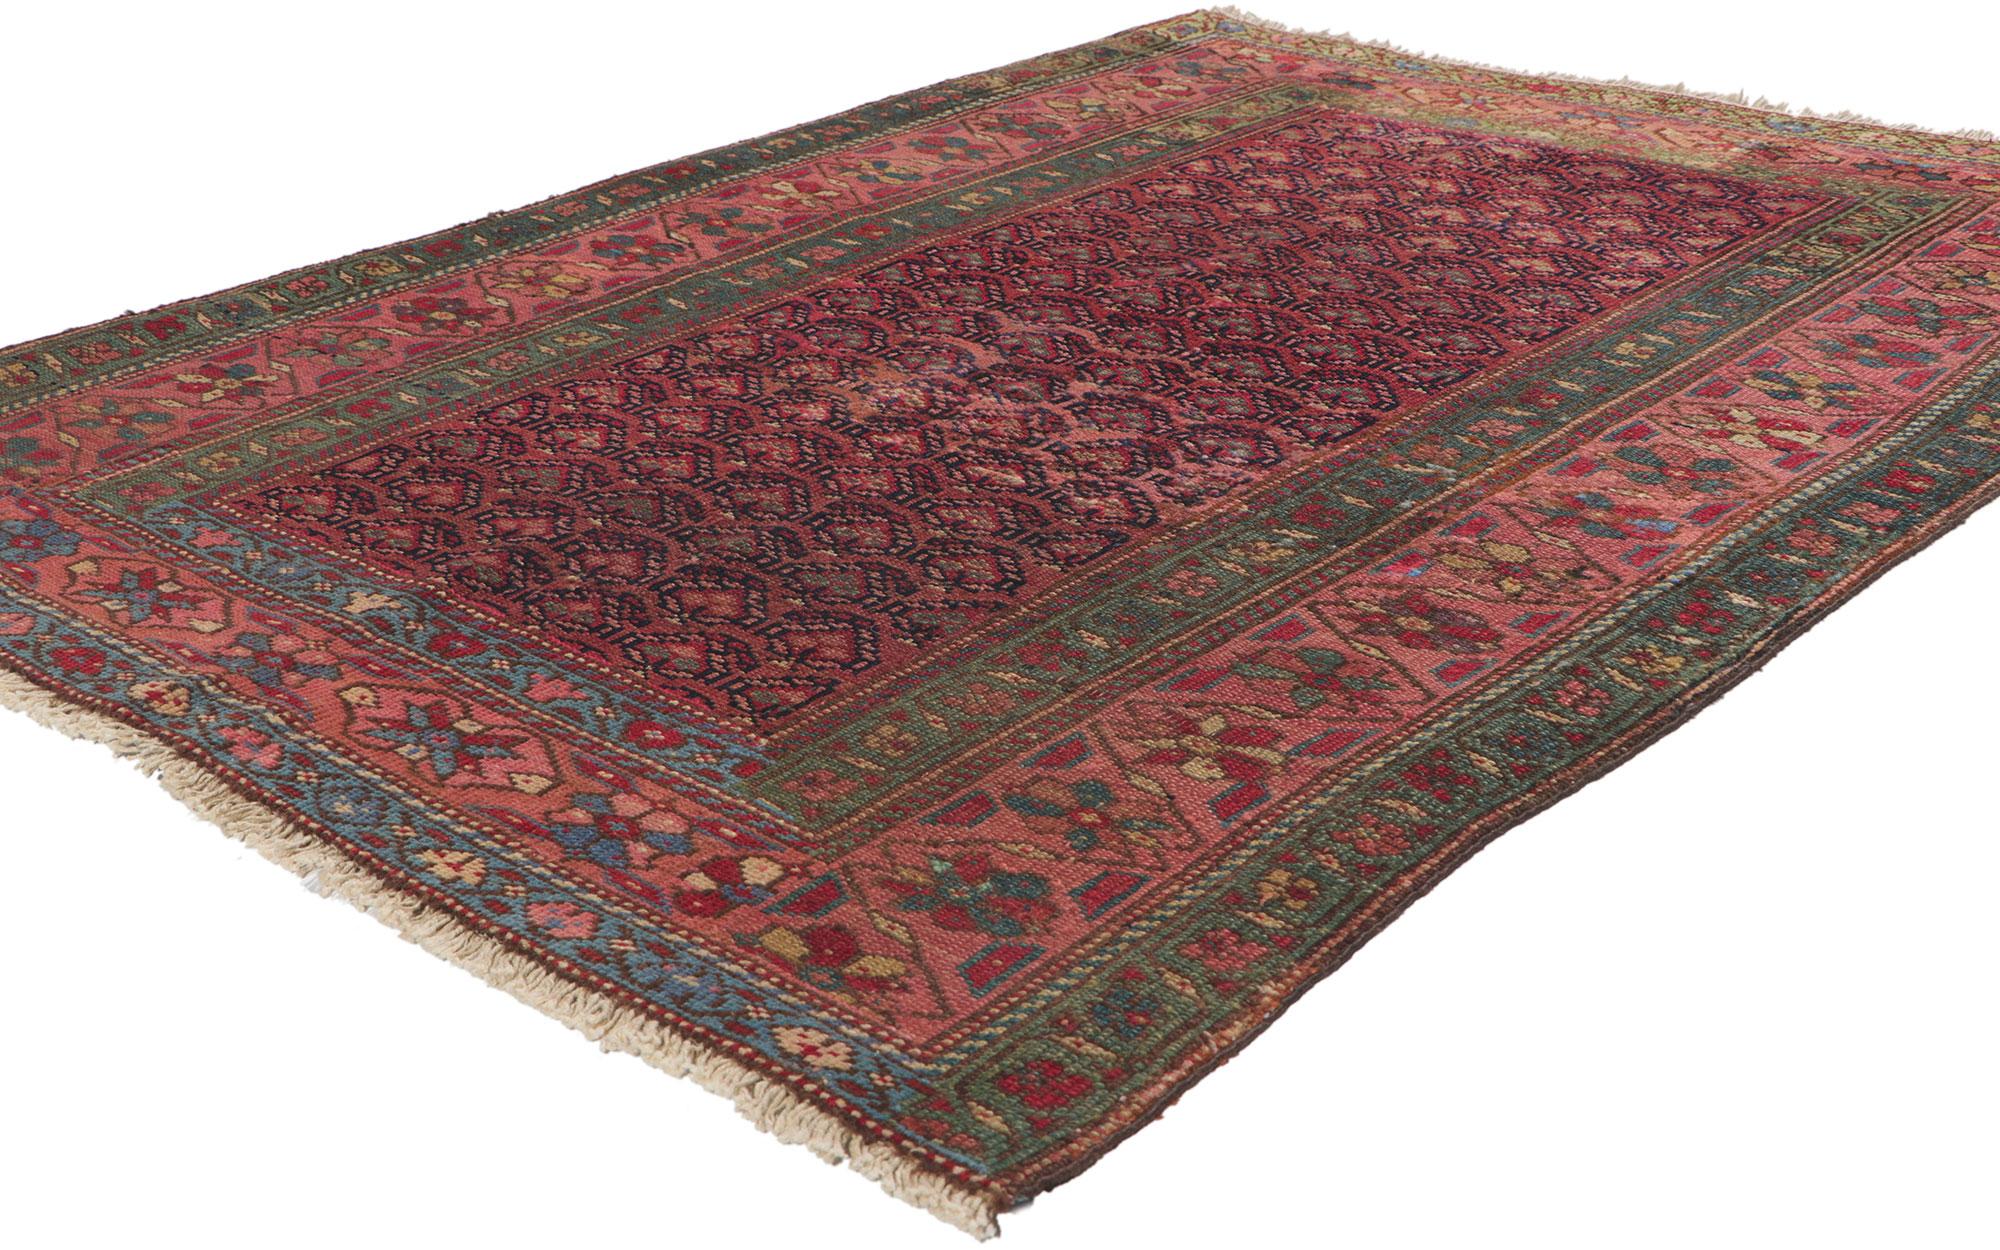 61113 Antique Persian Malayer Rug, 03'09 x 05'01. Emanating timeless style with incredible detail and texture, this hand knotted wool antique Persian rug is a captivating vision of woven beauty. The eye-catching boteh pattern and saturated color